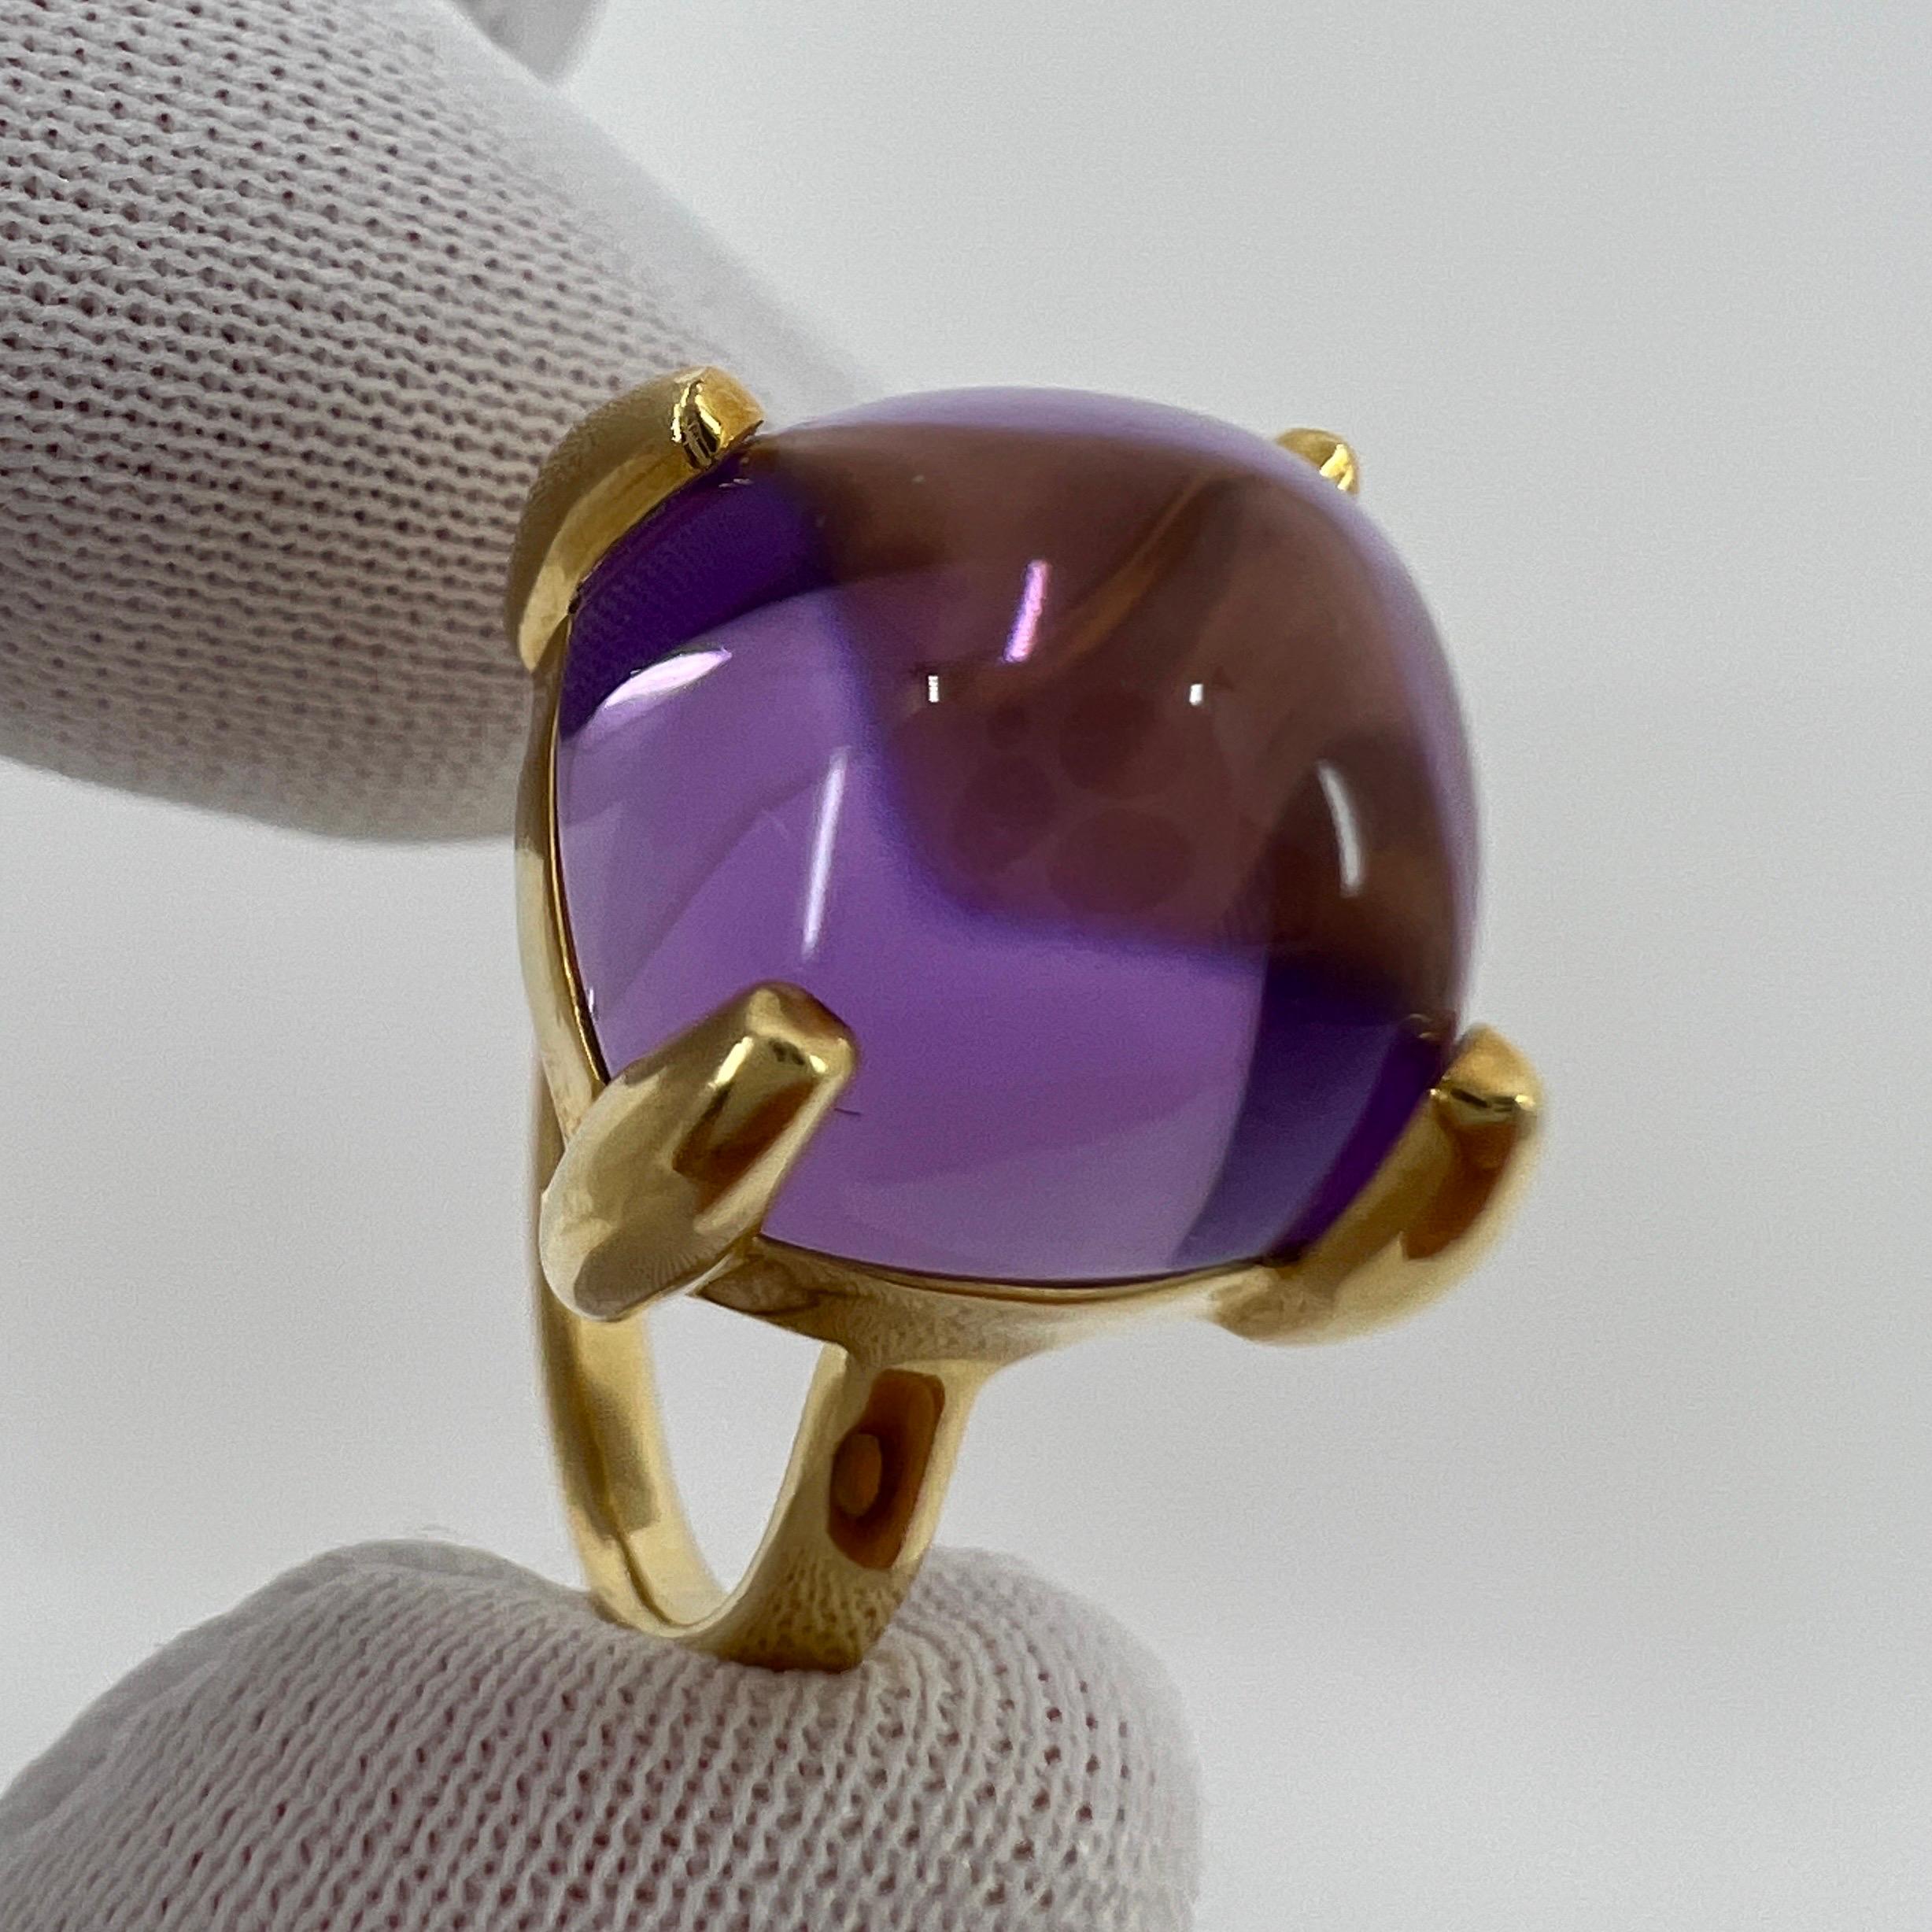 Rare Vintage Tiffany & Co. Paloma Picasso Amethyst Sugar Stack 18k Yellow Gold Ring.

A beautiful and rare sugarloaf purple amethyst ring from the Tiffany & Co Paloma Picasso collection.

Fine jewellery houses like Tiffany only use the finest